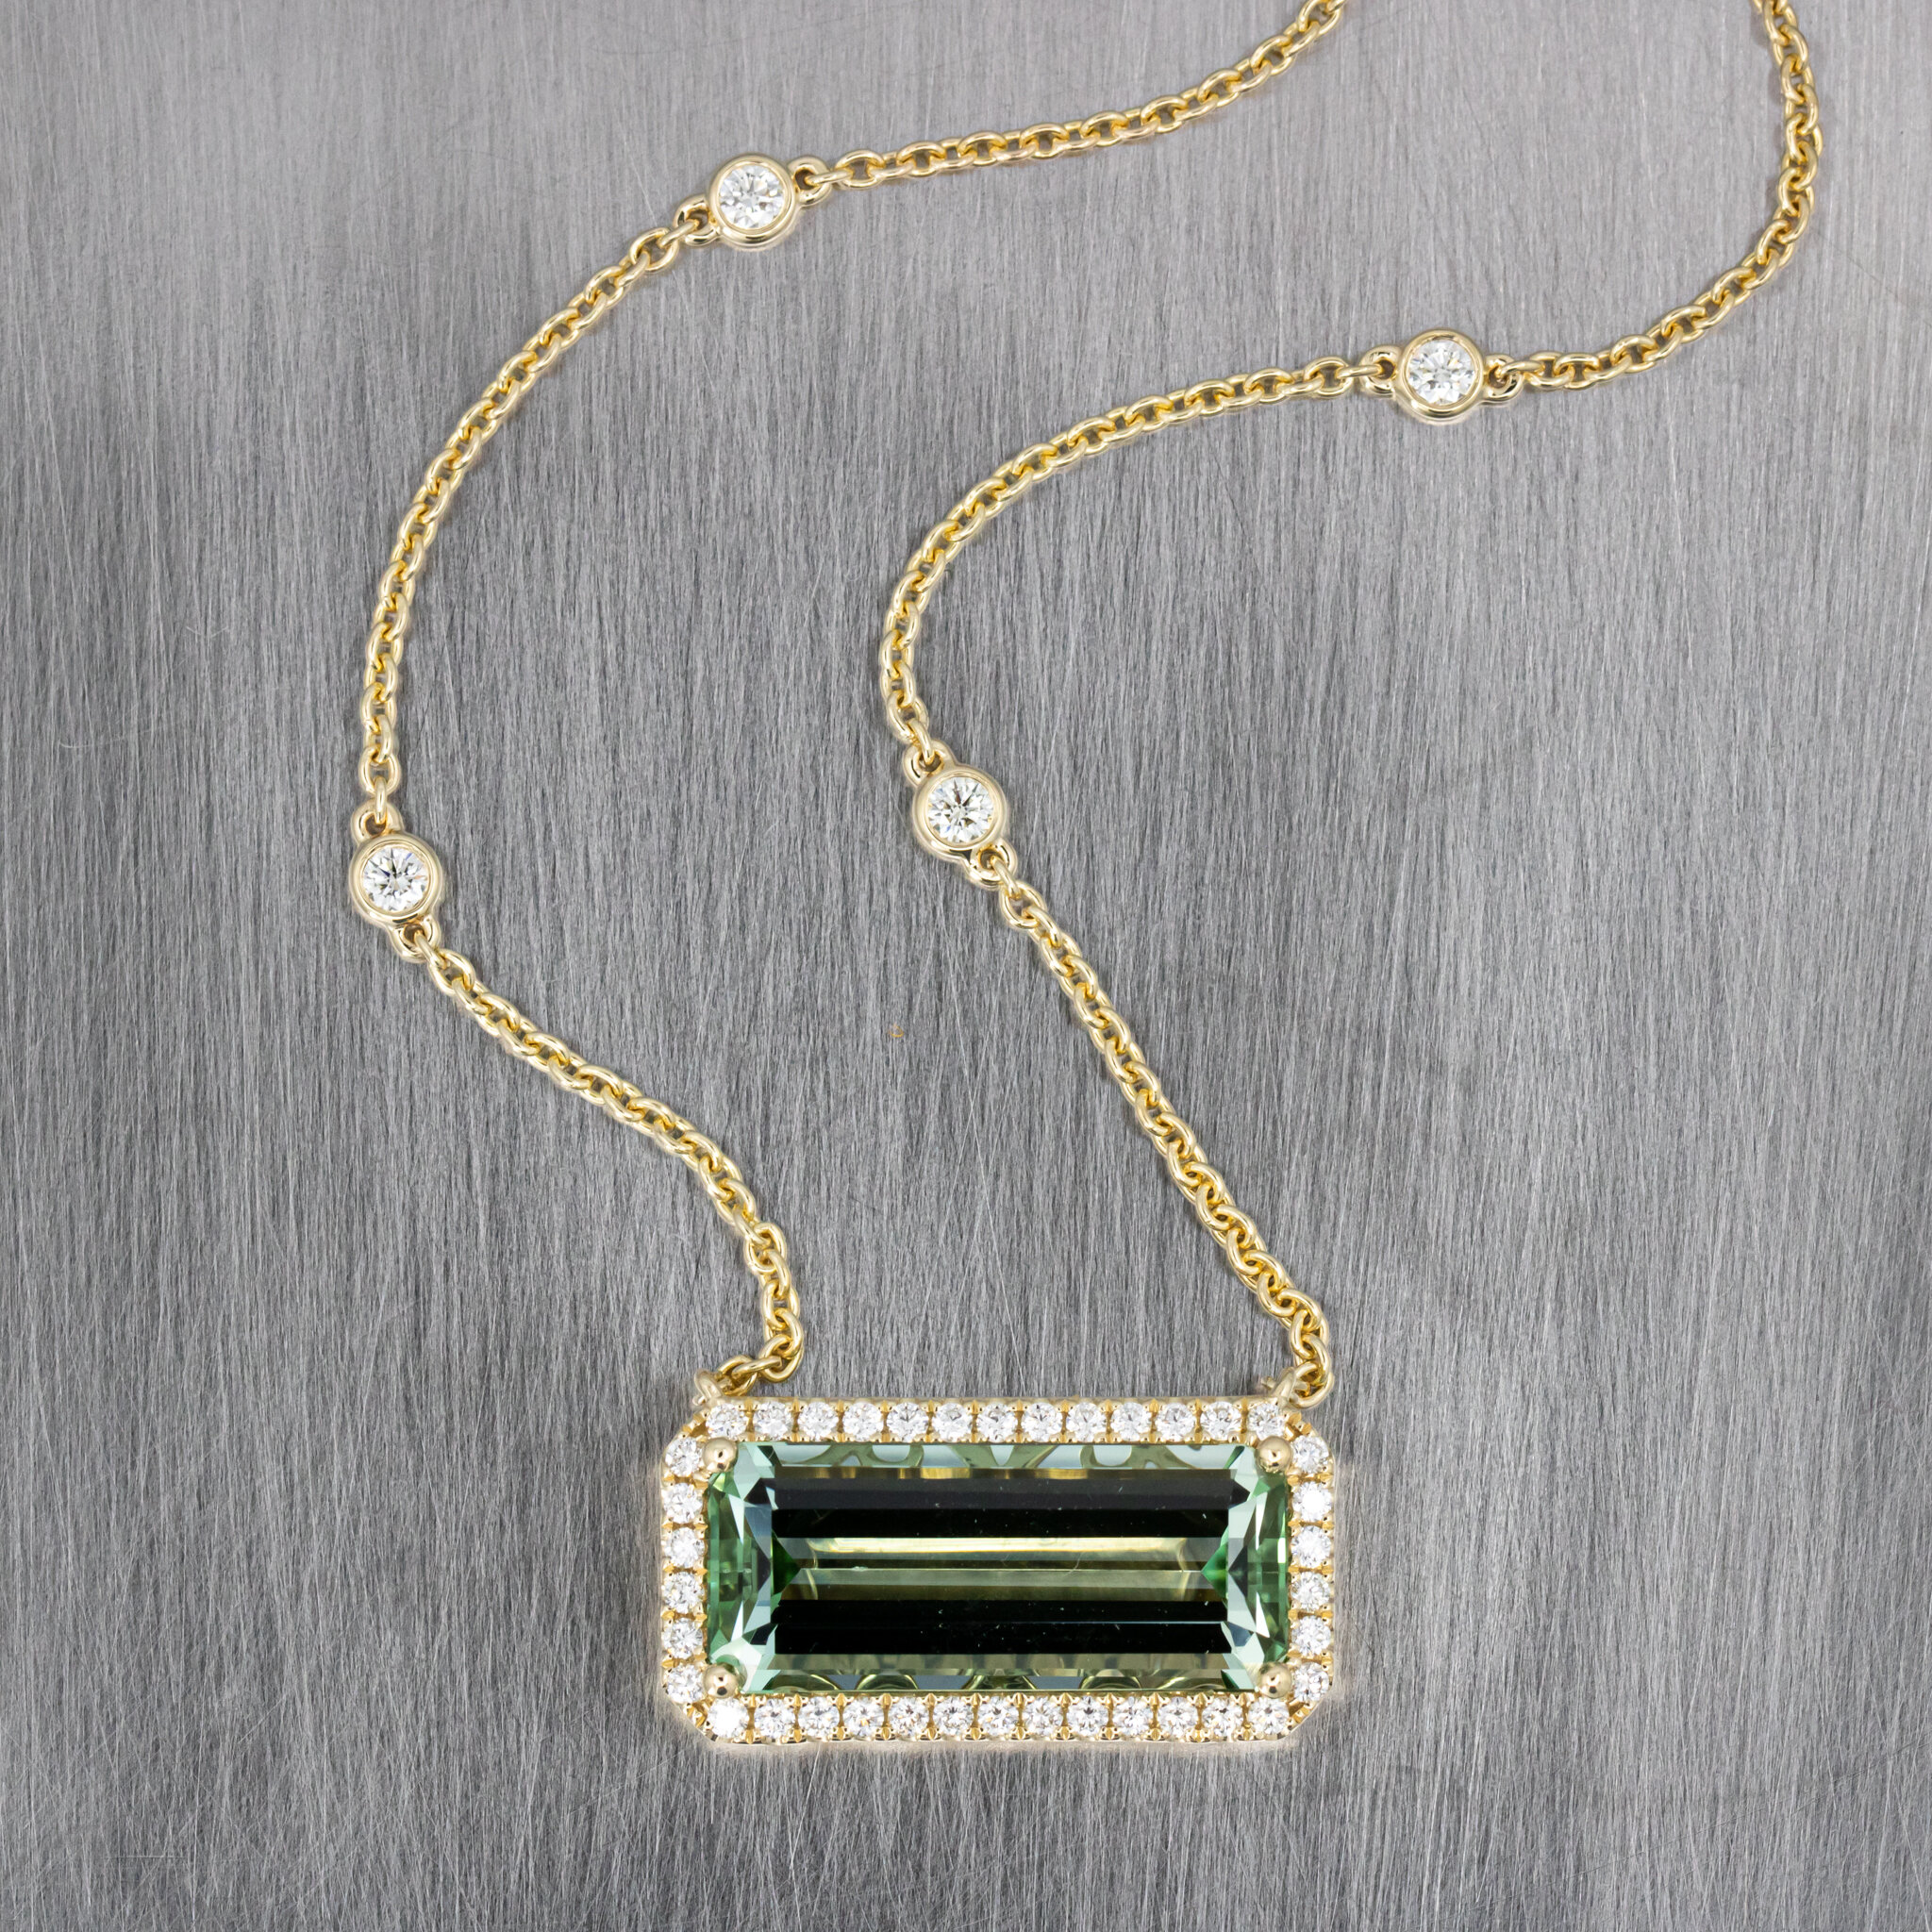 NEW INVENTORY CREATION - Light Green Emerald Cut Tourmaline with a Halo of Round Brilliant Cut Natural Diamonds set in 14k Yellow Gold on a Cable Chain with Bezel Set Diamonds stationed up the Chain - CHAIN CAN BE ADJUSTED FOR LENGTH, WIDTH, AND STYL